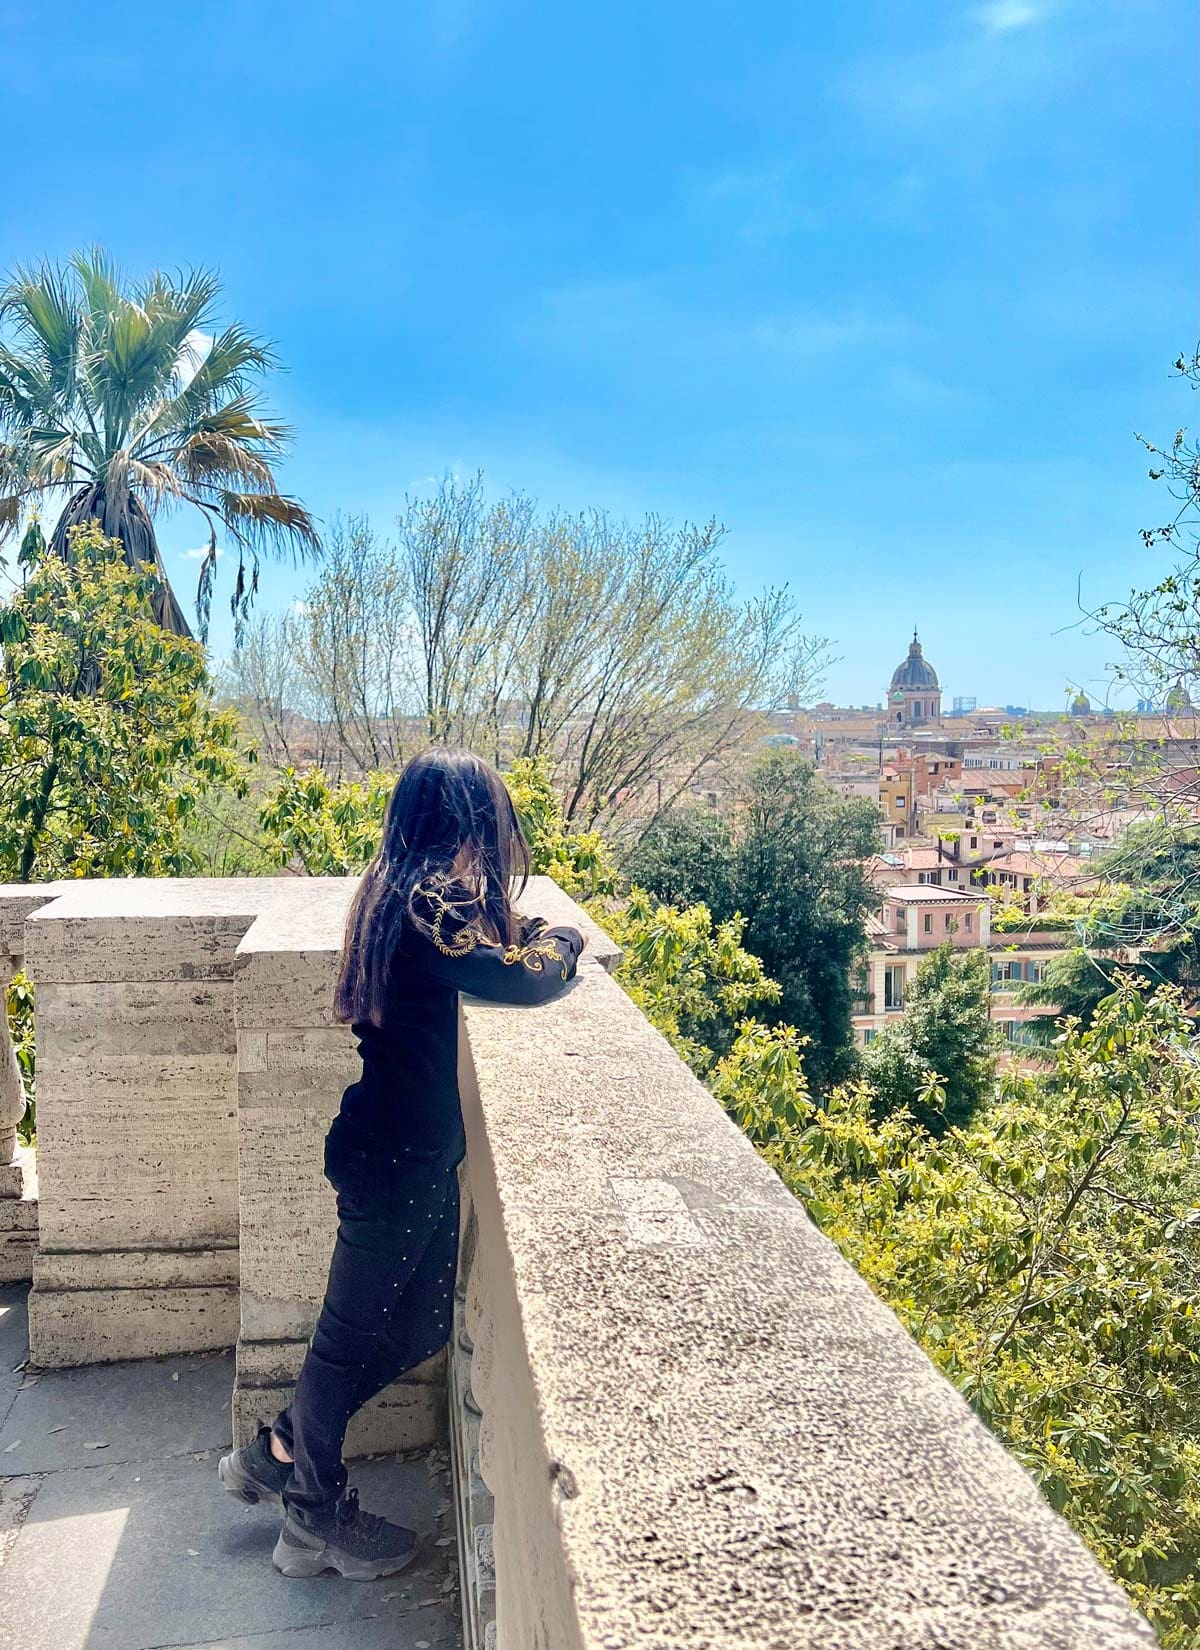 A woman leans over a wall to look at the Borghese Gardens.